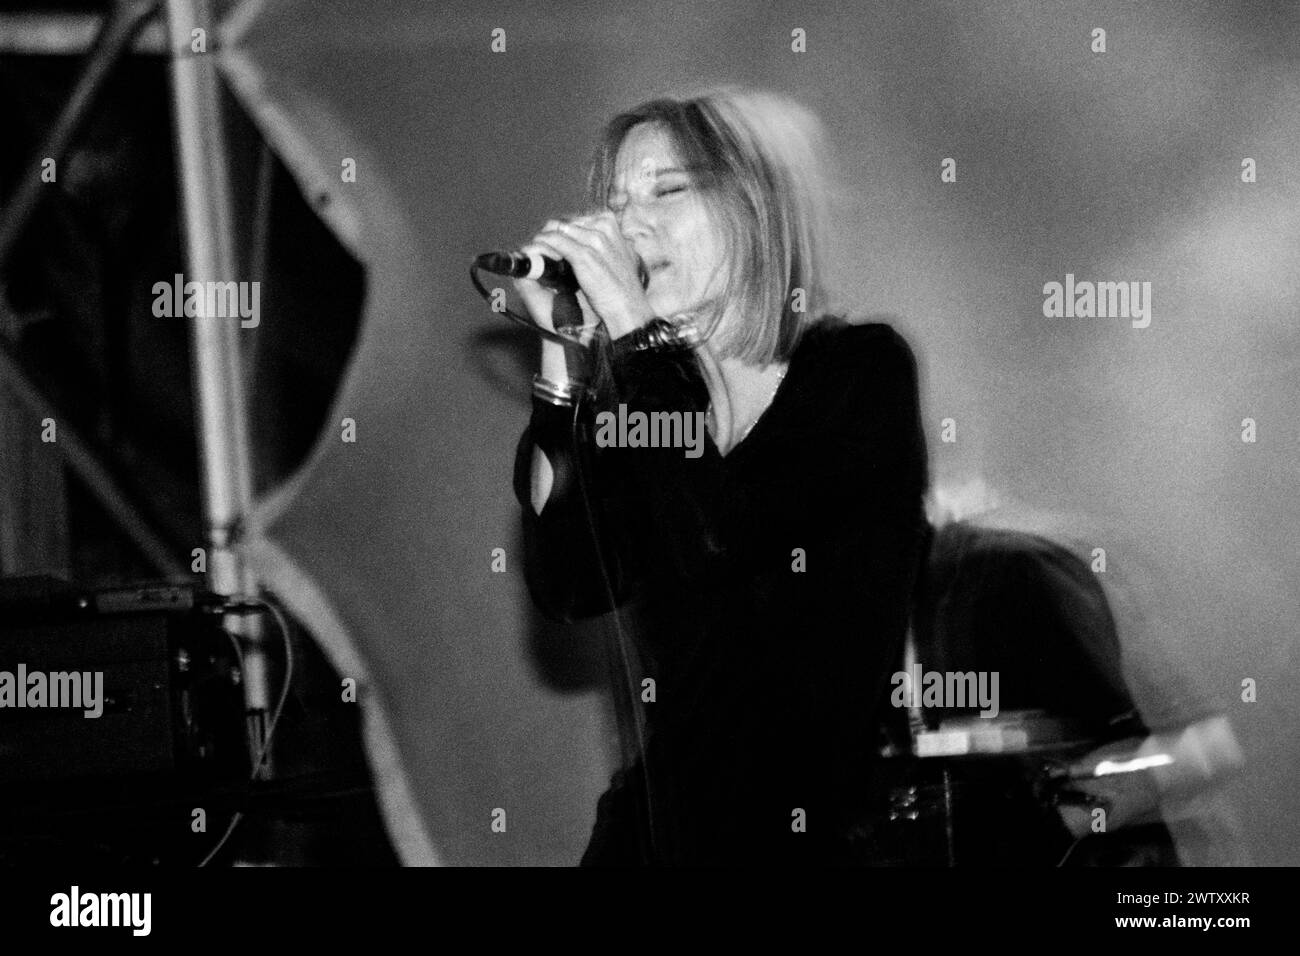 PORTIHEAD, BRISTOL FREE CONCERT, 1998: Beth Gibbons of Portishead singing at Bristol Community Free Festival at Ashton Court, Bristol, England on 19 July 1998. The band were touring with their 2nd album 'Portishead' and went on a 9-year hiatus shortly after this concert. Photo: Rob Watkins.   INFO: Portishead, a British trip-hop band formed in 1991, redefined electronic music with their dark, atmospheric sound. Albums like 'Dummy' showcased their haunting melodies and Beth Gibbons' emotive vocals, cementing their status as pioneers of the genre. Stock Photo